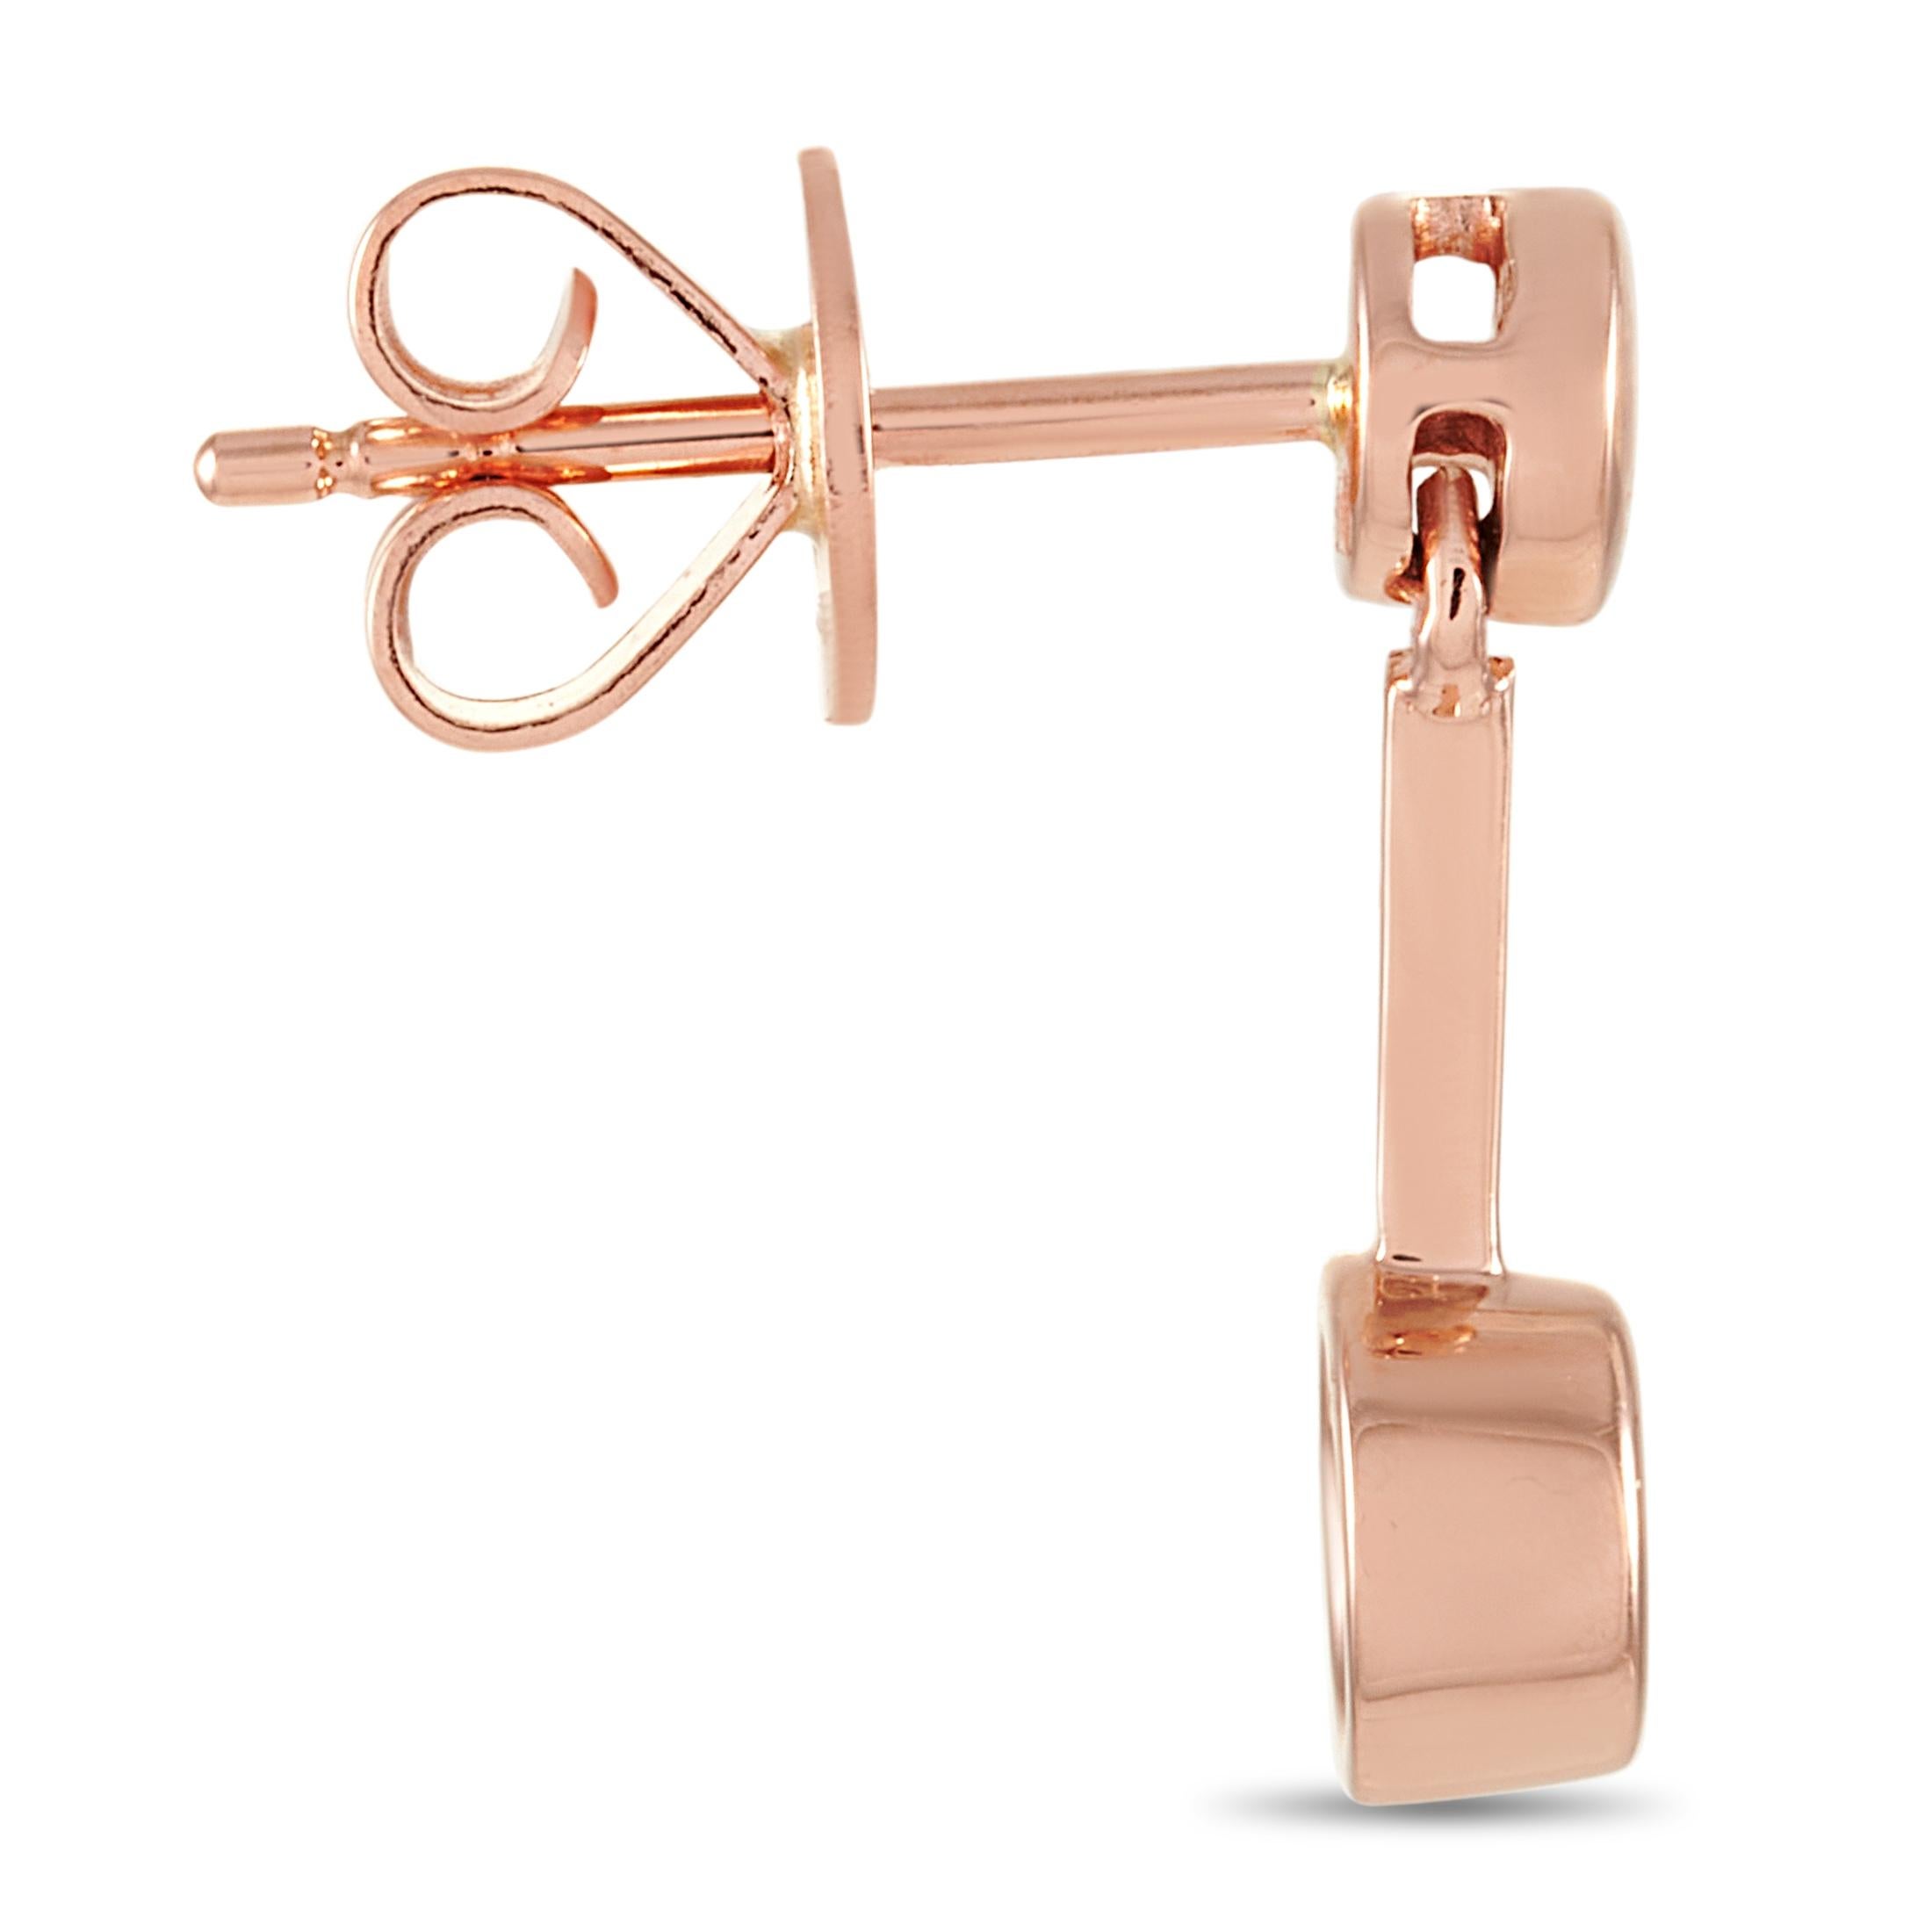 These LB Exclusive earrings are made of 14K rose gold and embellished with diamonds that total 0.25 carats. The earrings measure 0.50” in length and 0.13” in width and each of the two weighs 1.2 grams.
 
 The pair is offered in brand new condition